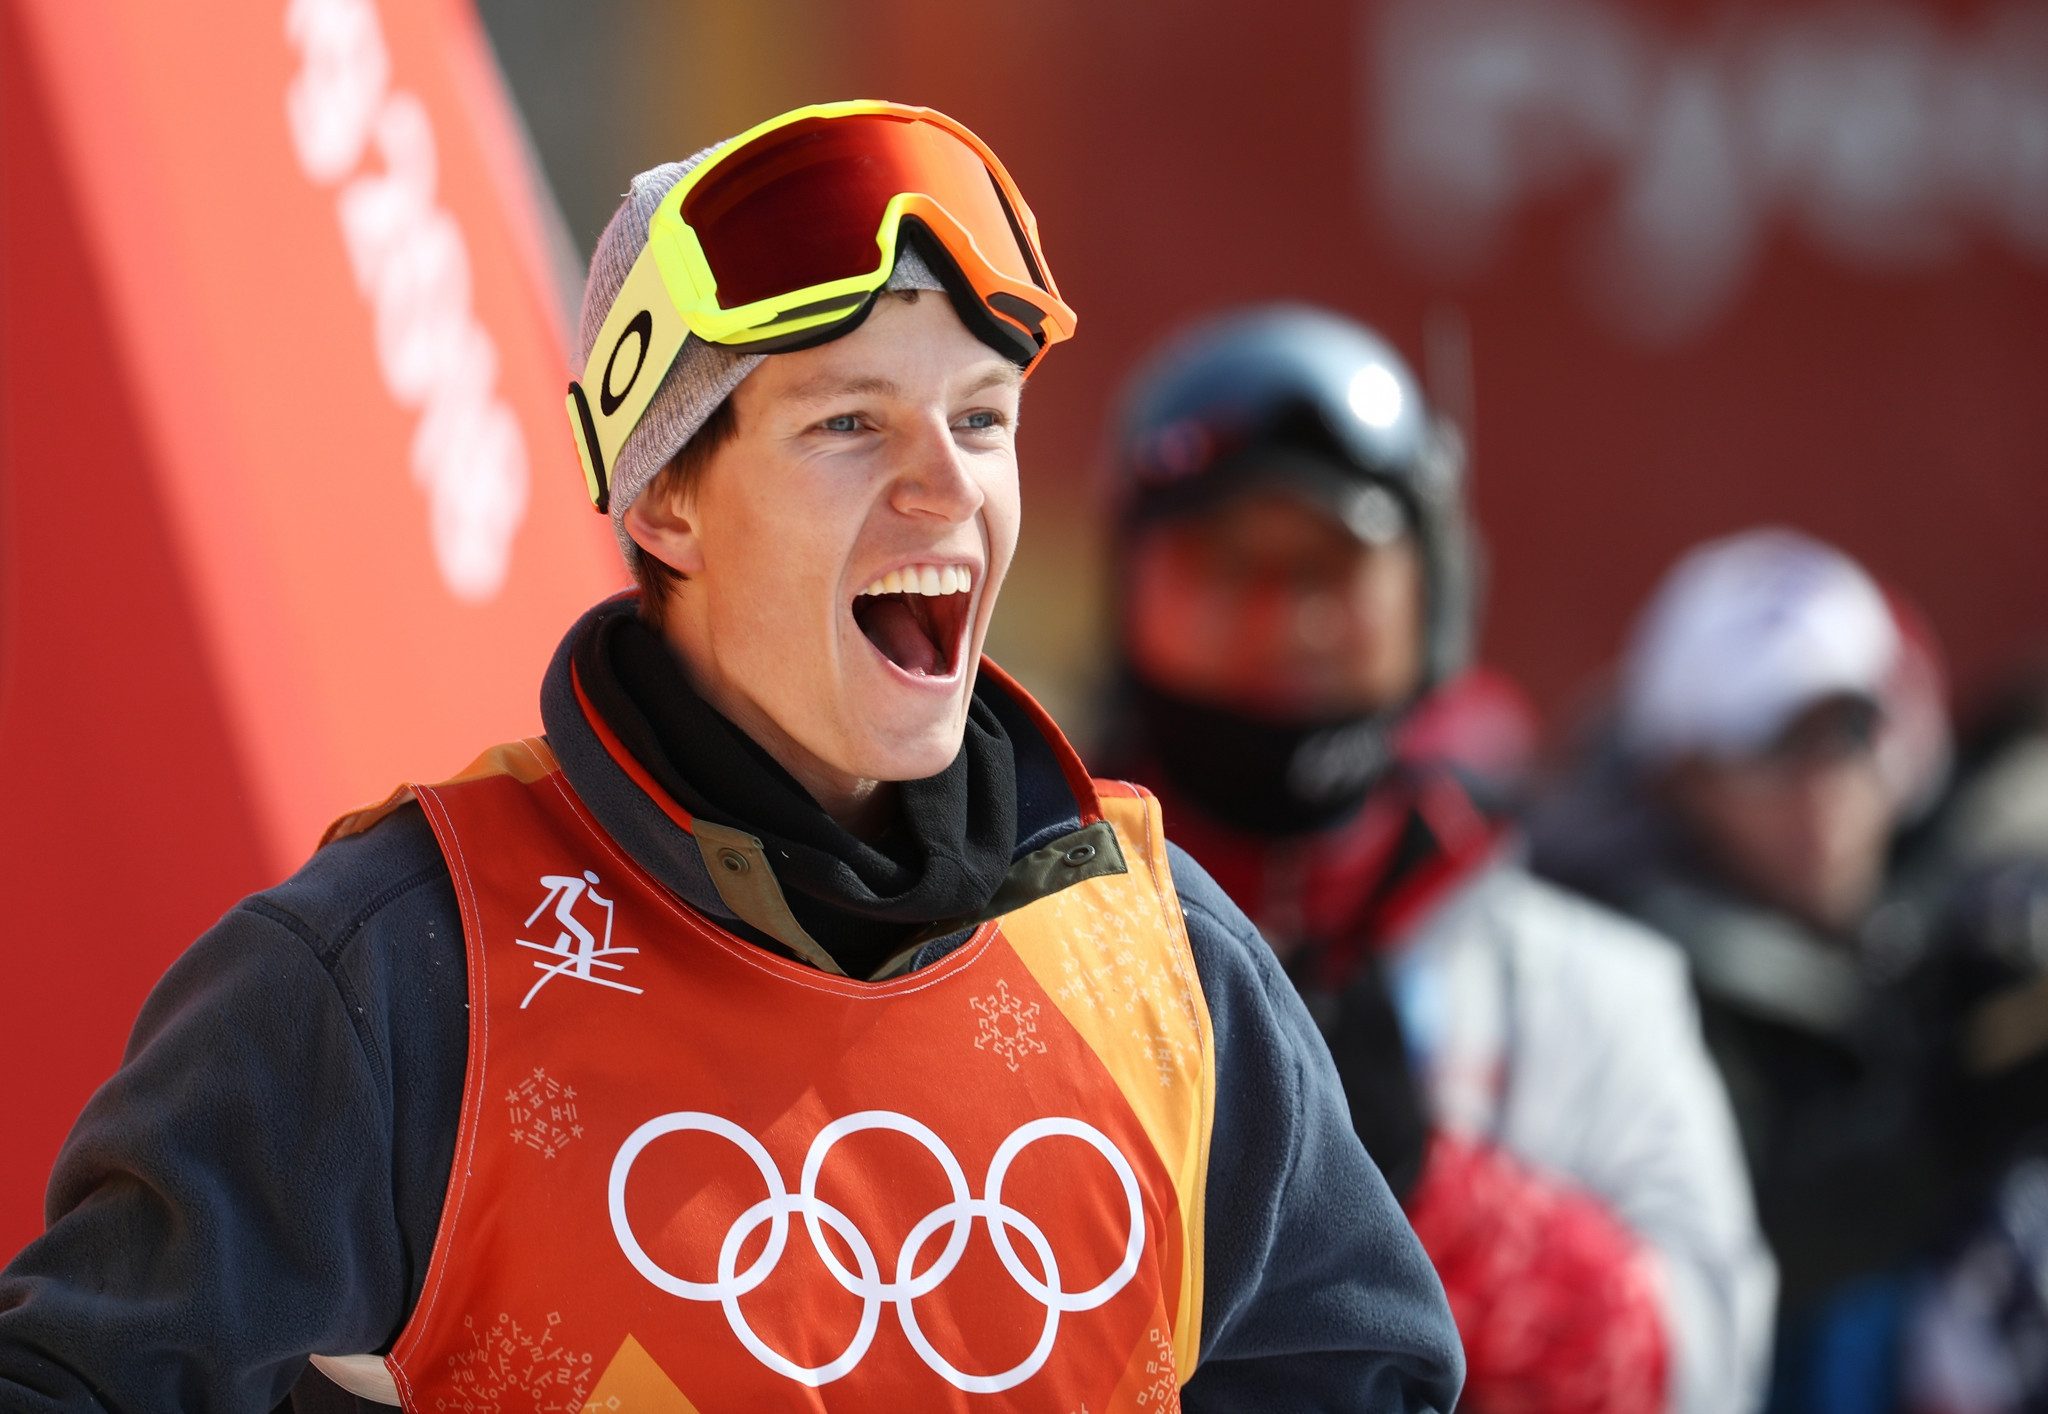 Norway's Oystein Braaten posted a huge first-run score to win the men’s ski slopestyle gold medal at the Pyeongchang 2018 Winter Olympic Games today ©Getty Images